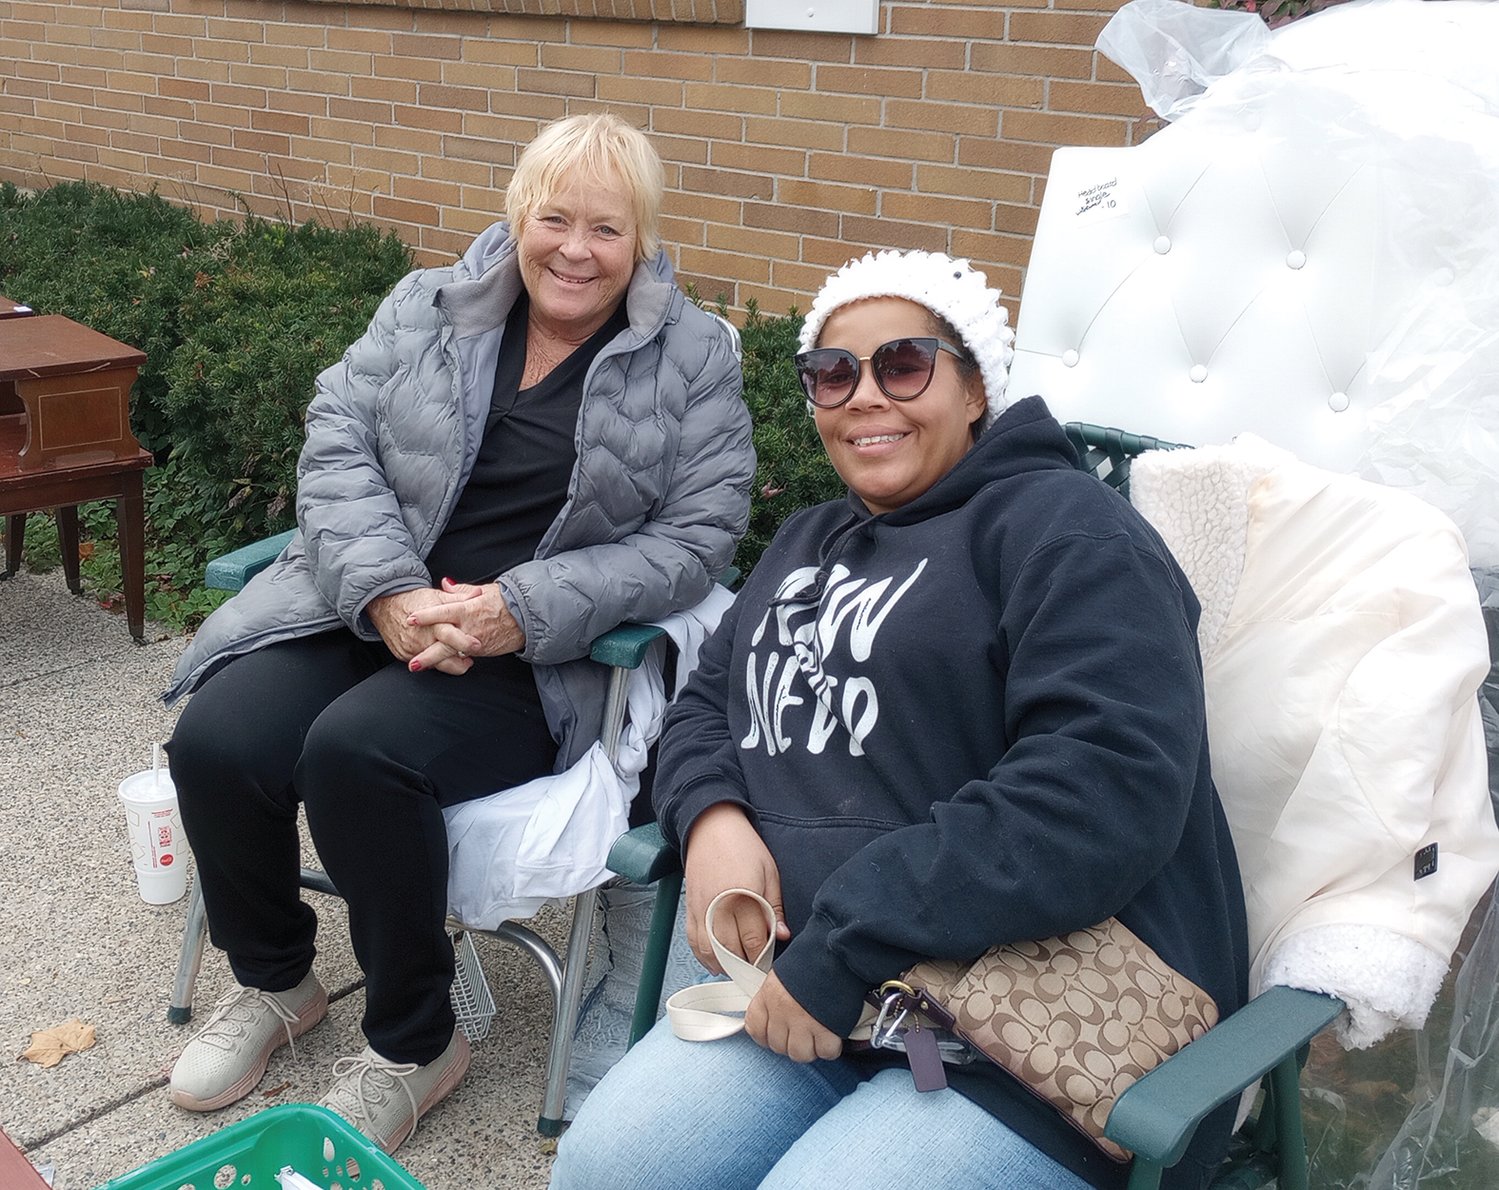 Gayle Thompson (left) and her daughter Vanessa McDaniel were overseeing a garage sale when asked to discuss a $175 million bond proposal on the ballot in November to build a new public safety facility and improve conditions of three fire stations in Lansing.